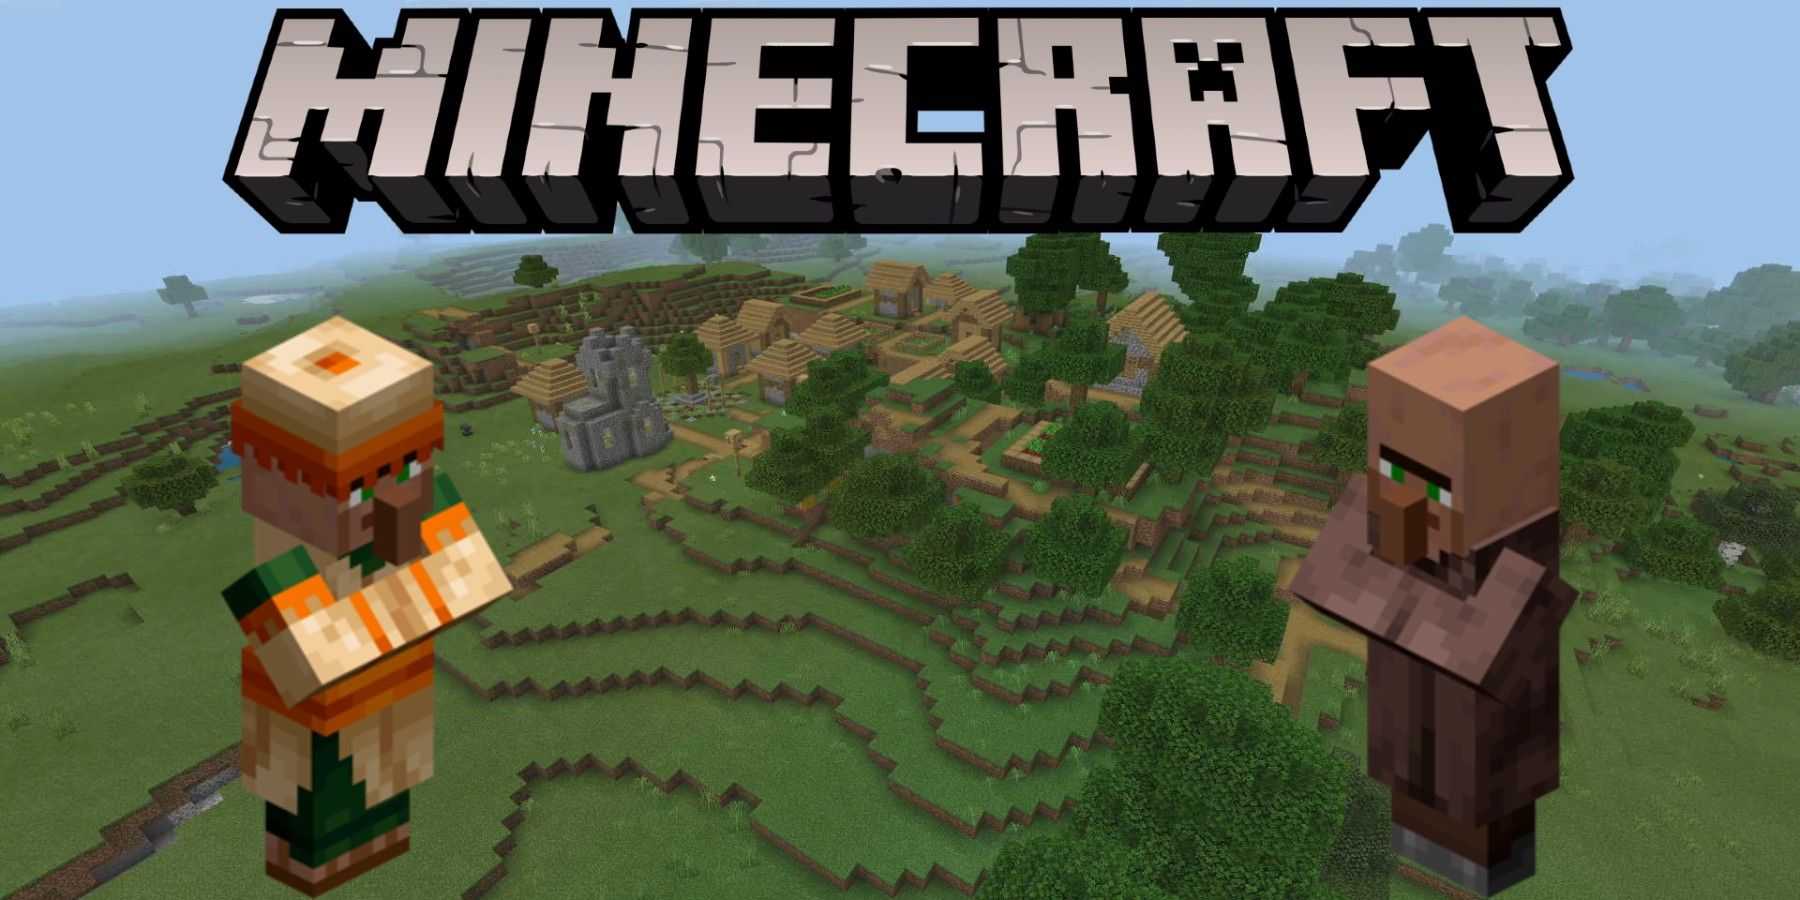 Minecraft Clip Shows Hilarious Way to Move Villagers